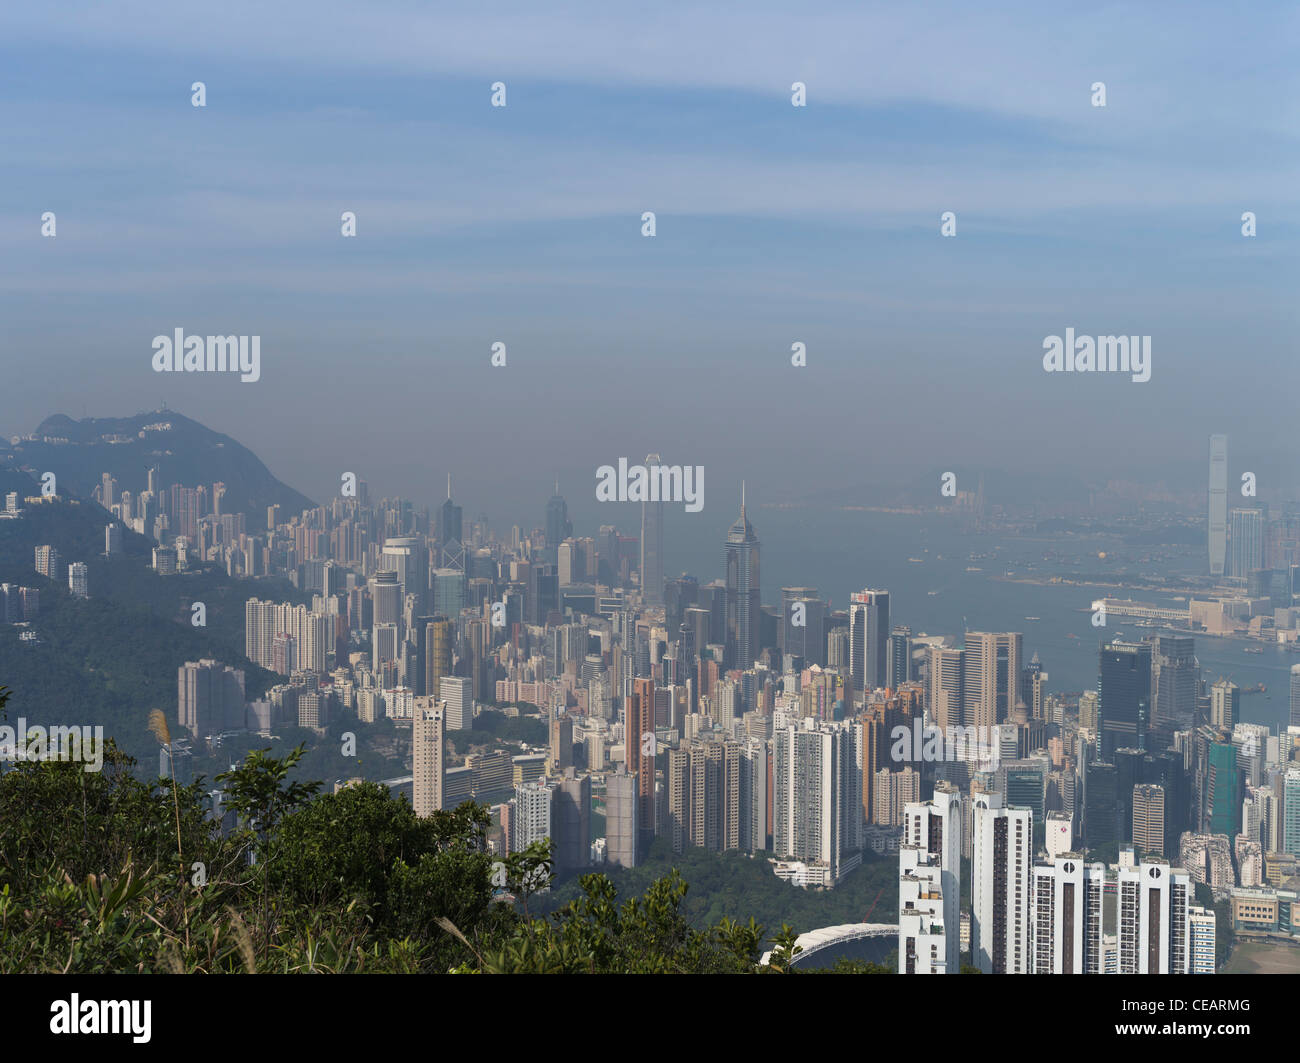 dh  JARDINES LOOKOUT HONG KONG View of Hong Kong island harbour smog polution polluted air pollution china Stock Photo